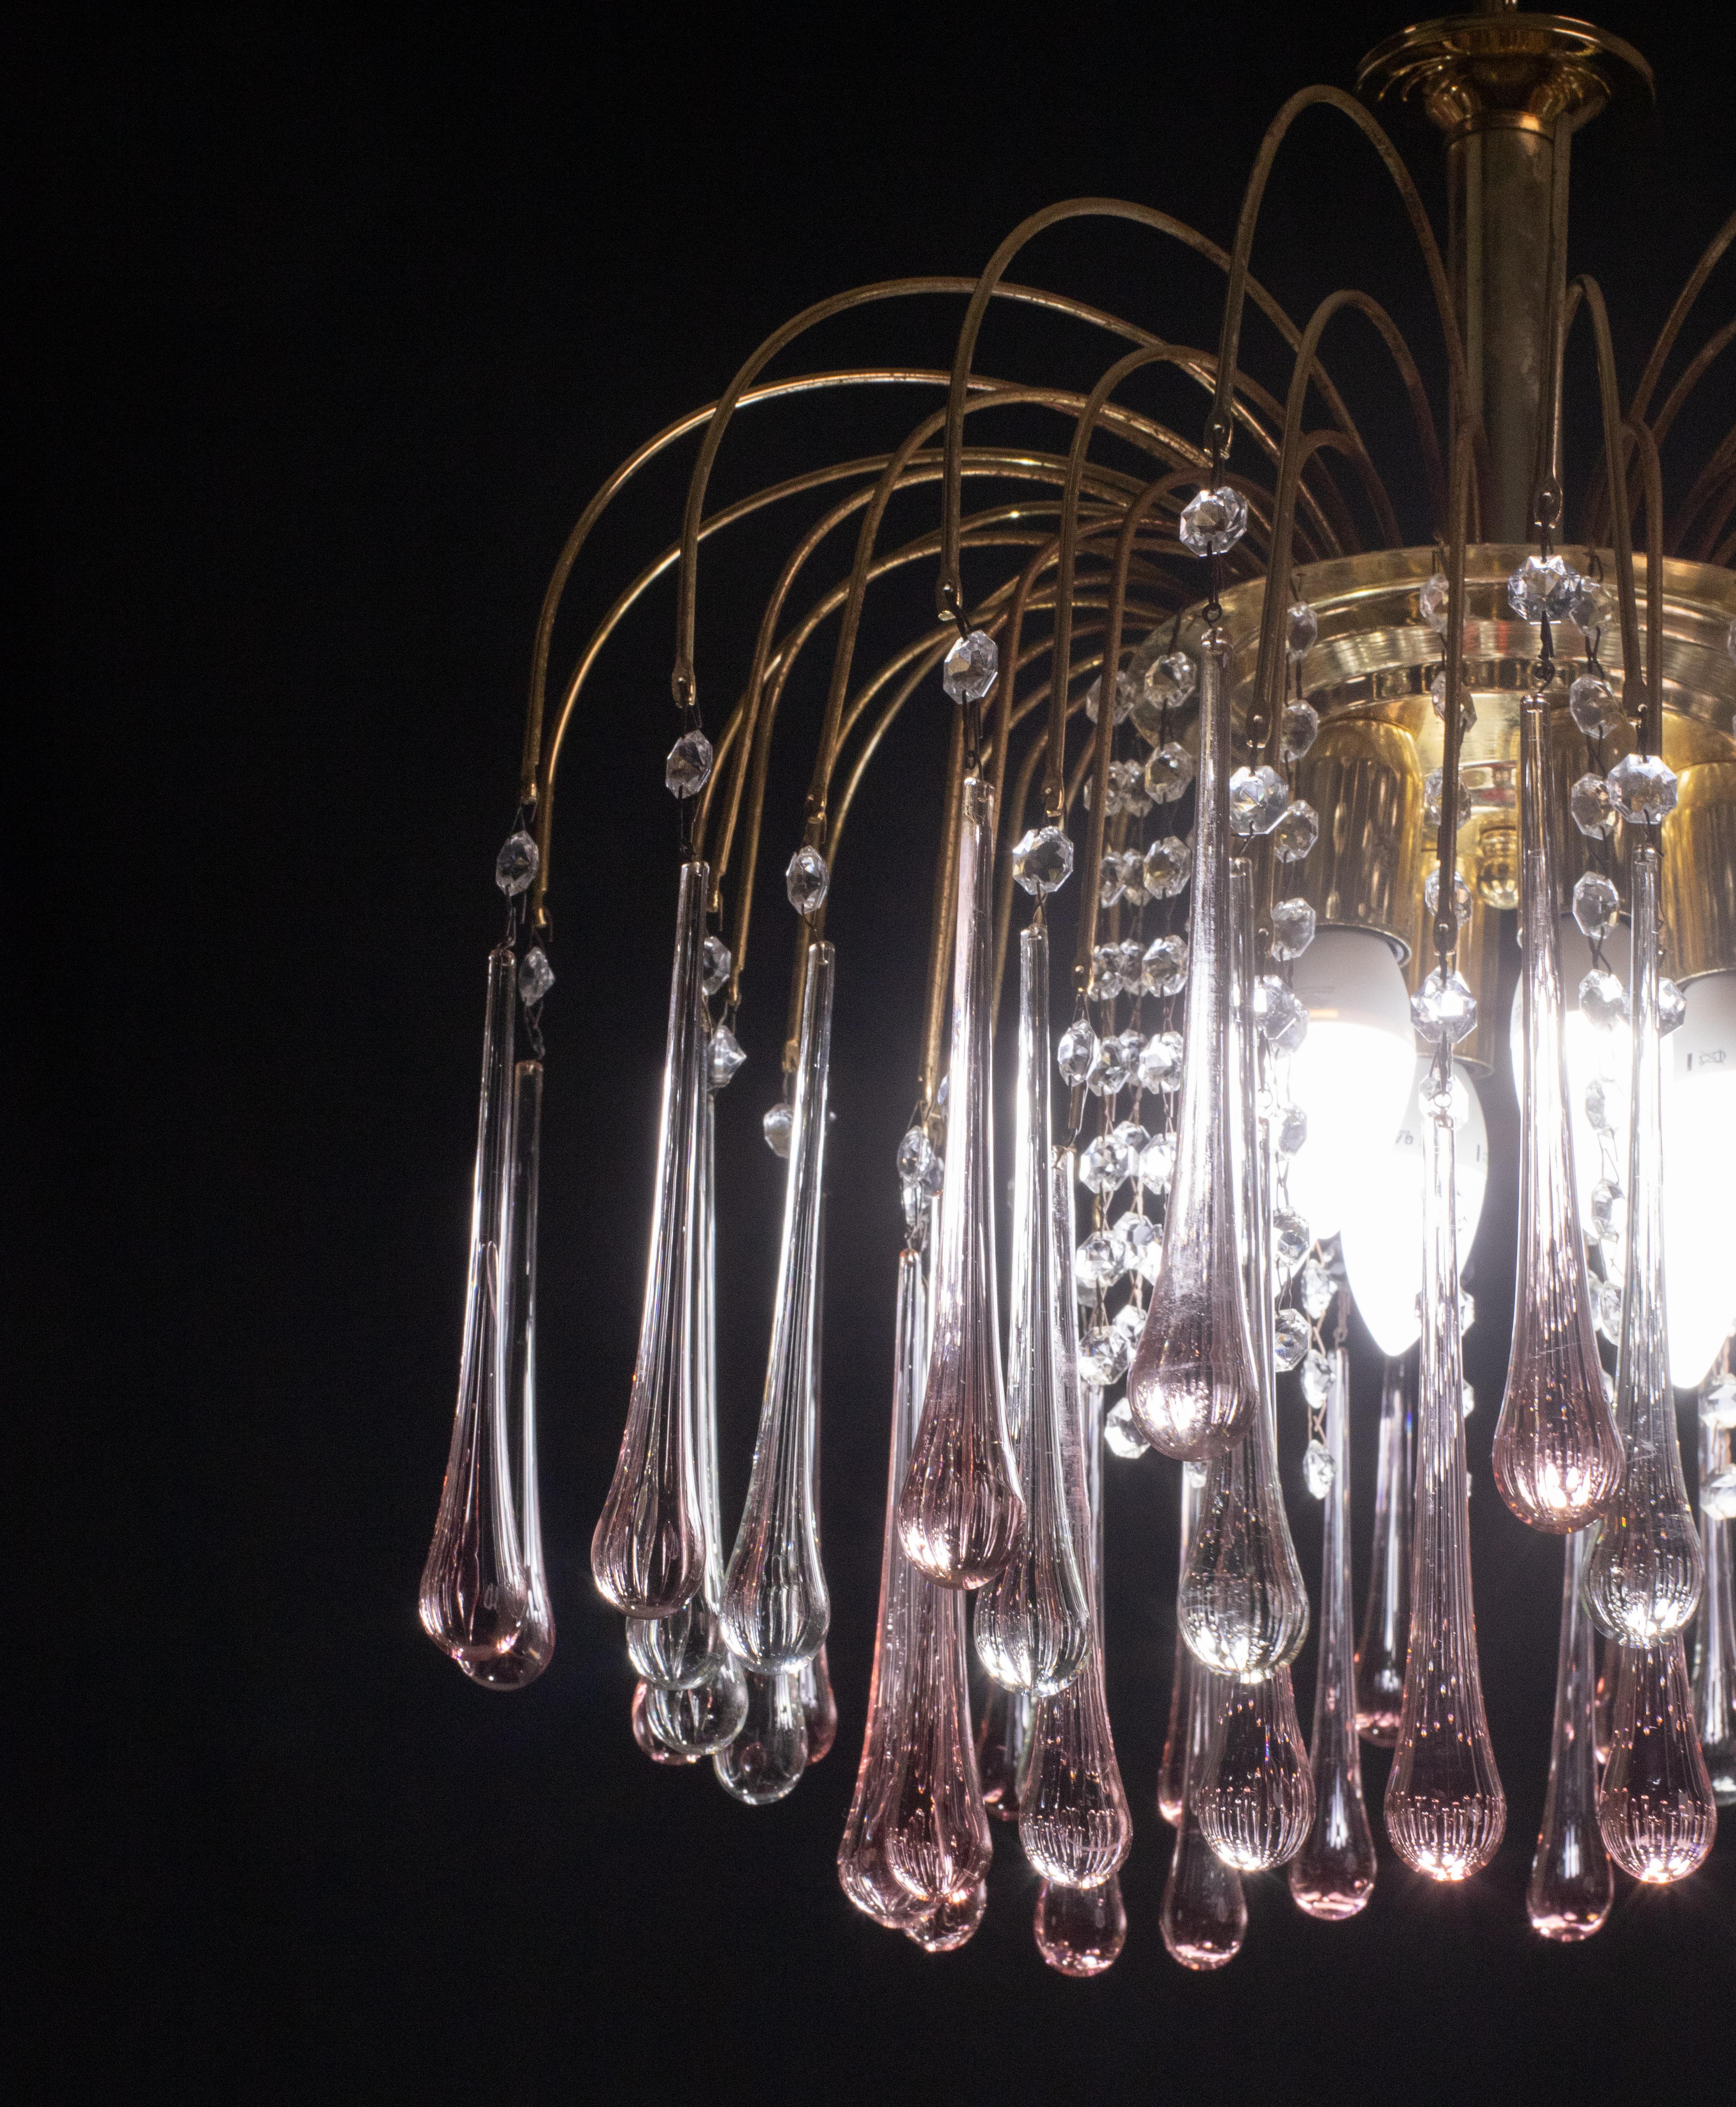 Lady Barbara, Murano Chandelier Pink and White Drops, Venini Style, 1970s For Sale 5